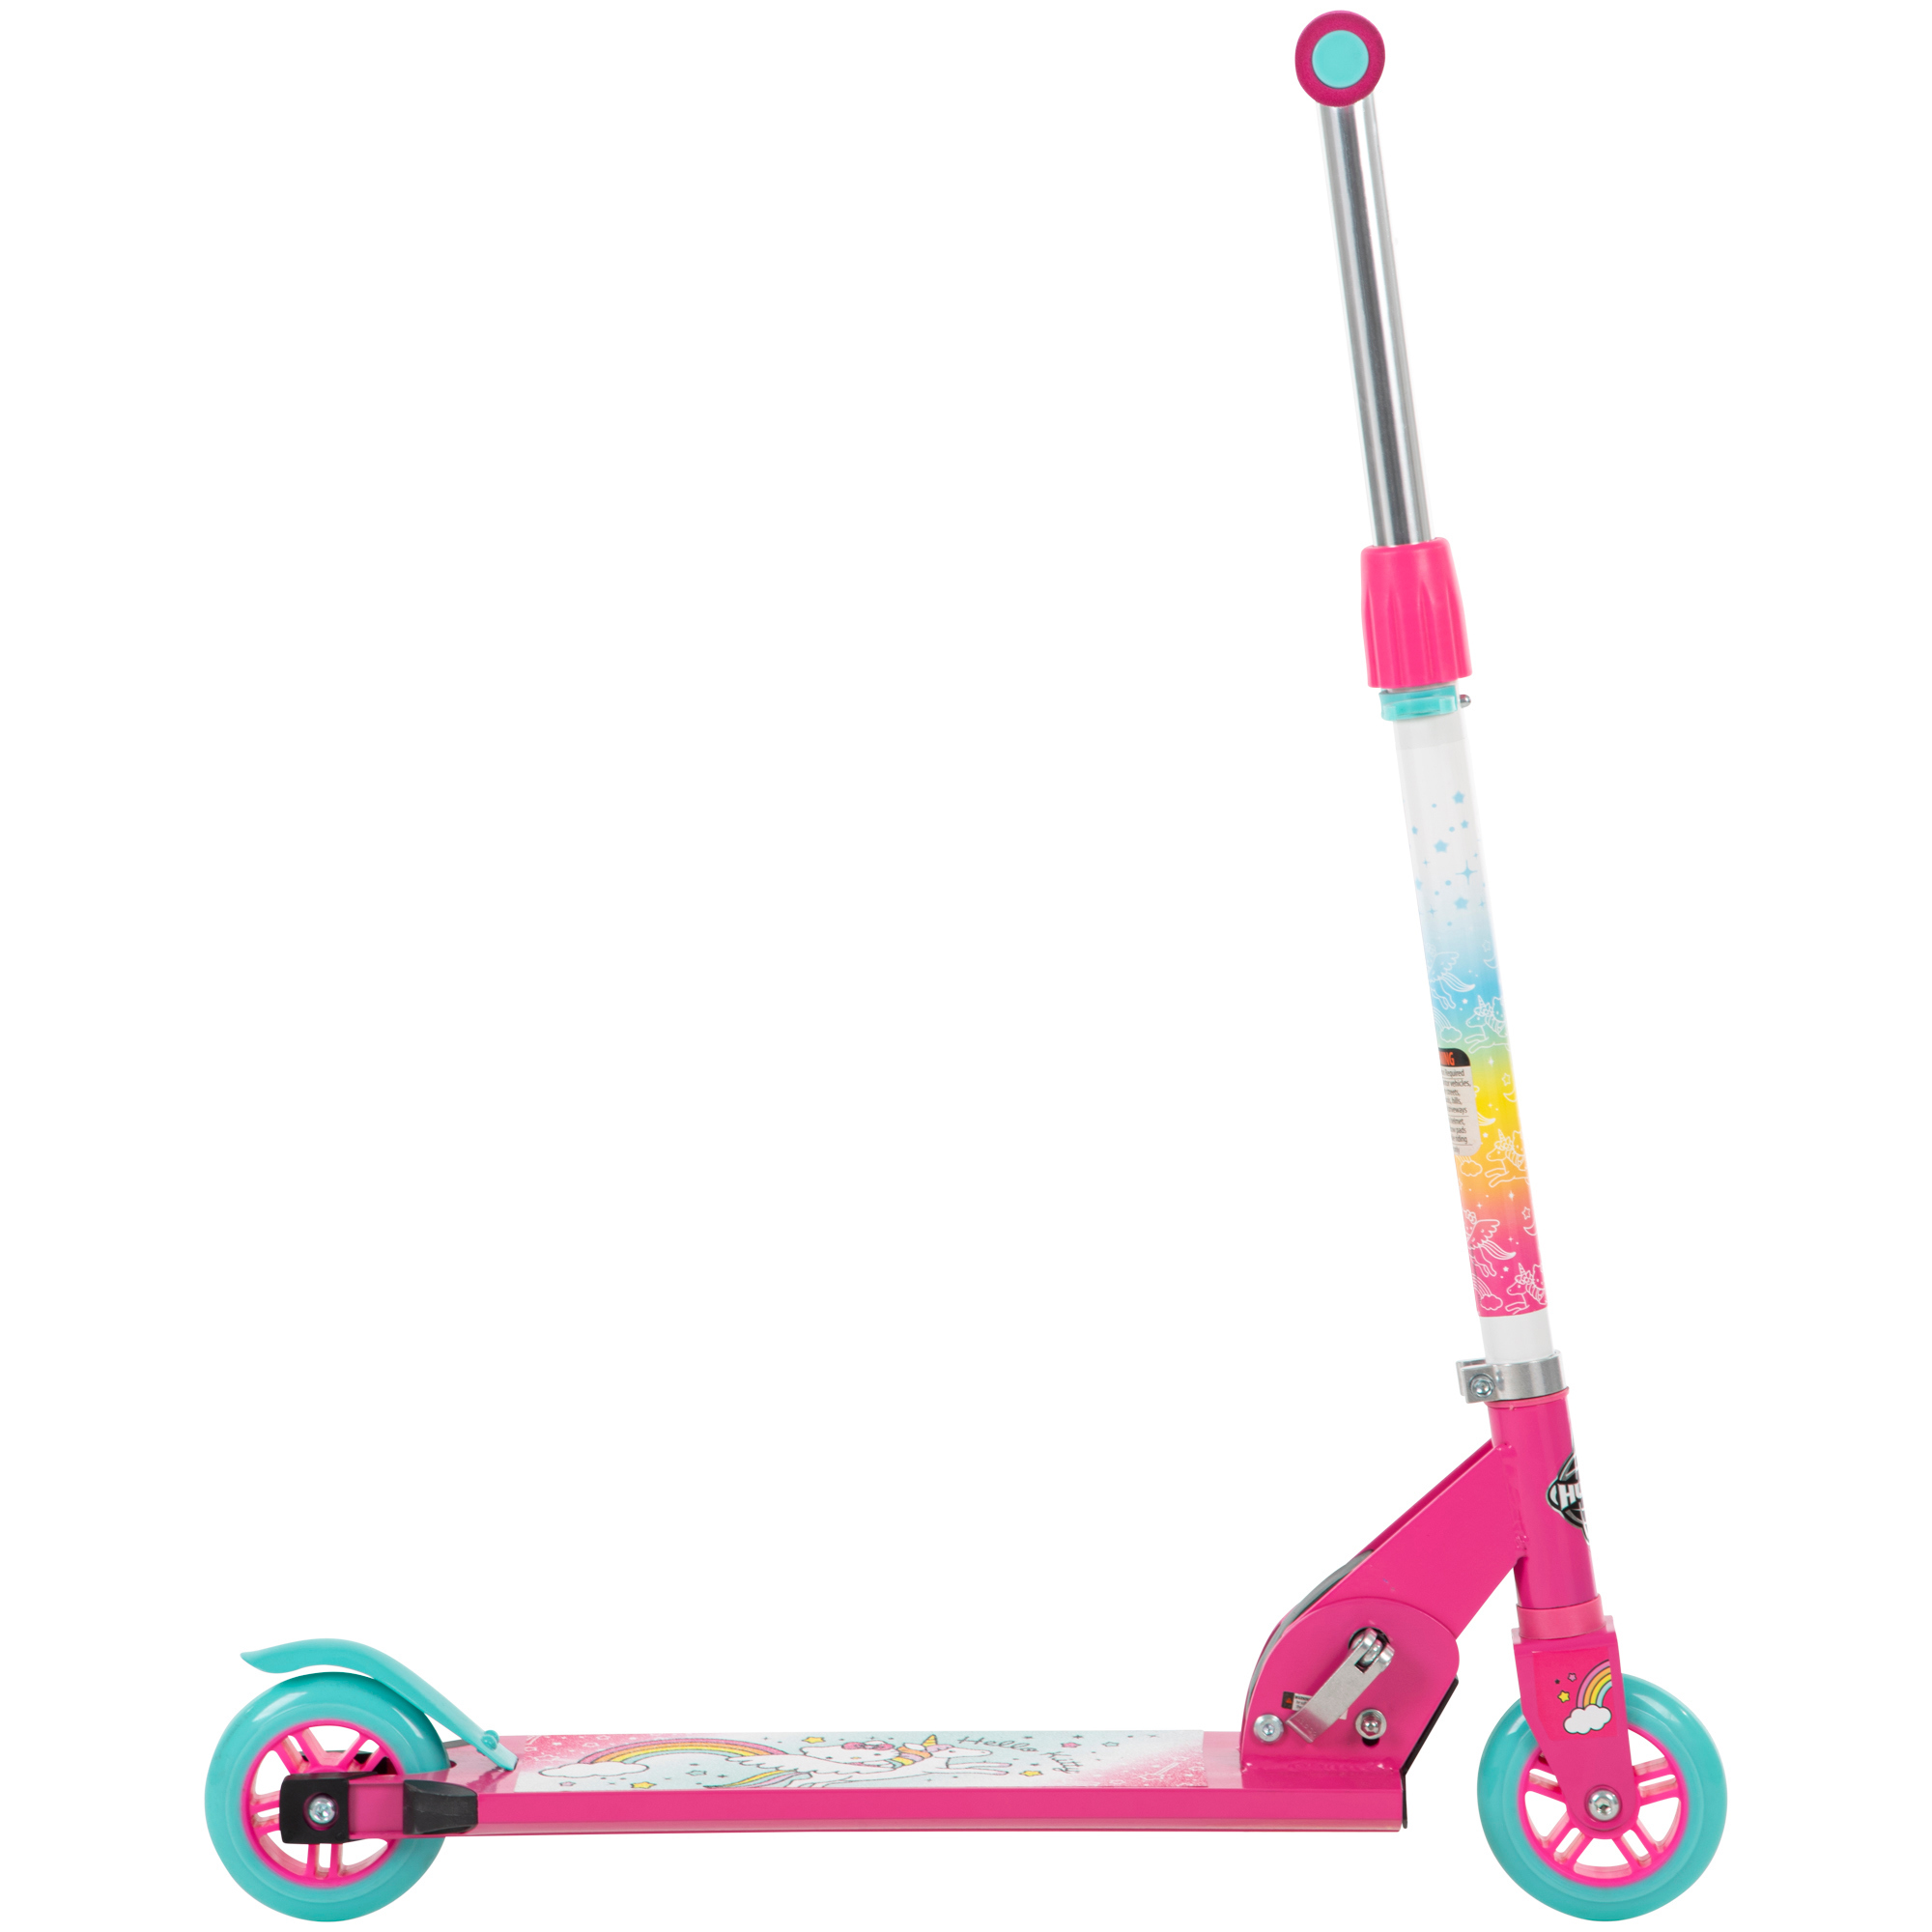 Hello Kitty Girls Inline Scooter, Pink, by Huffy - image 3 of 9